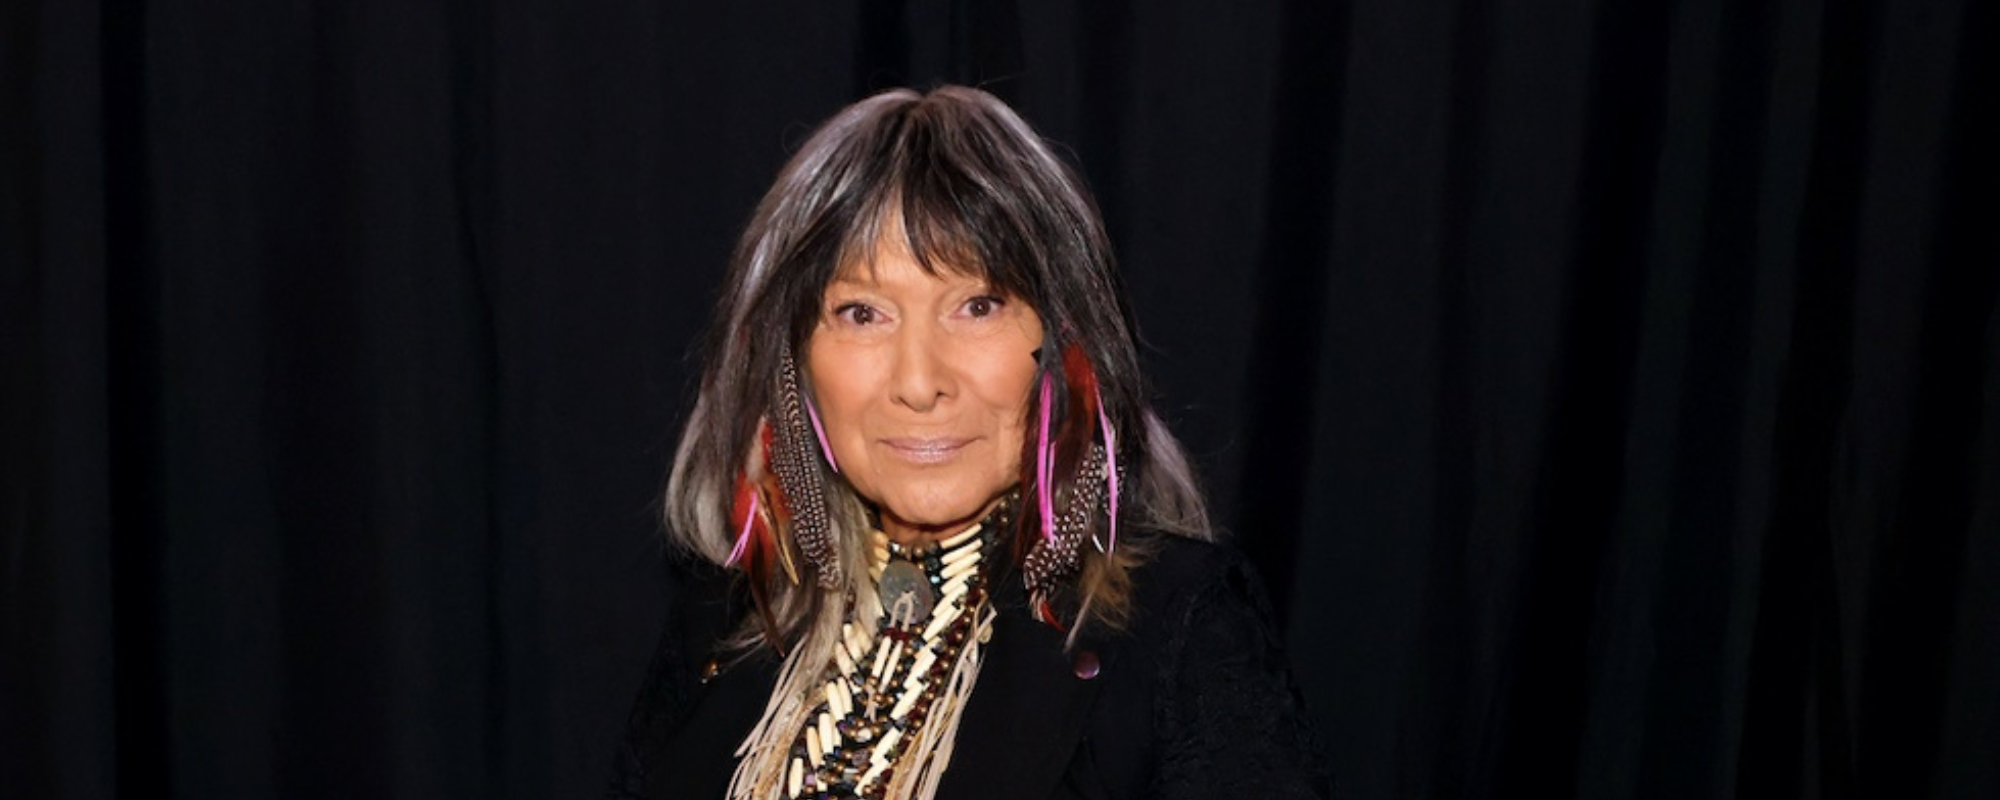 Buffy Sainte-Marie Responds to CBC Report Questioning Her Indigenous Heritage